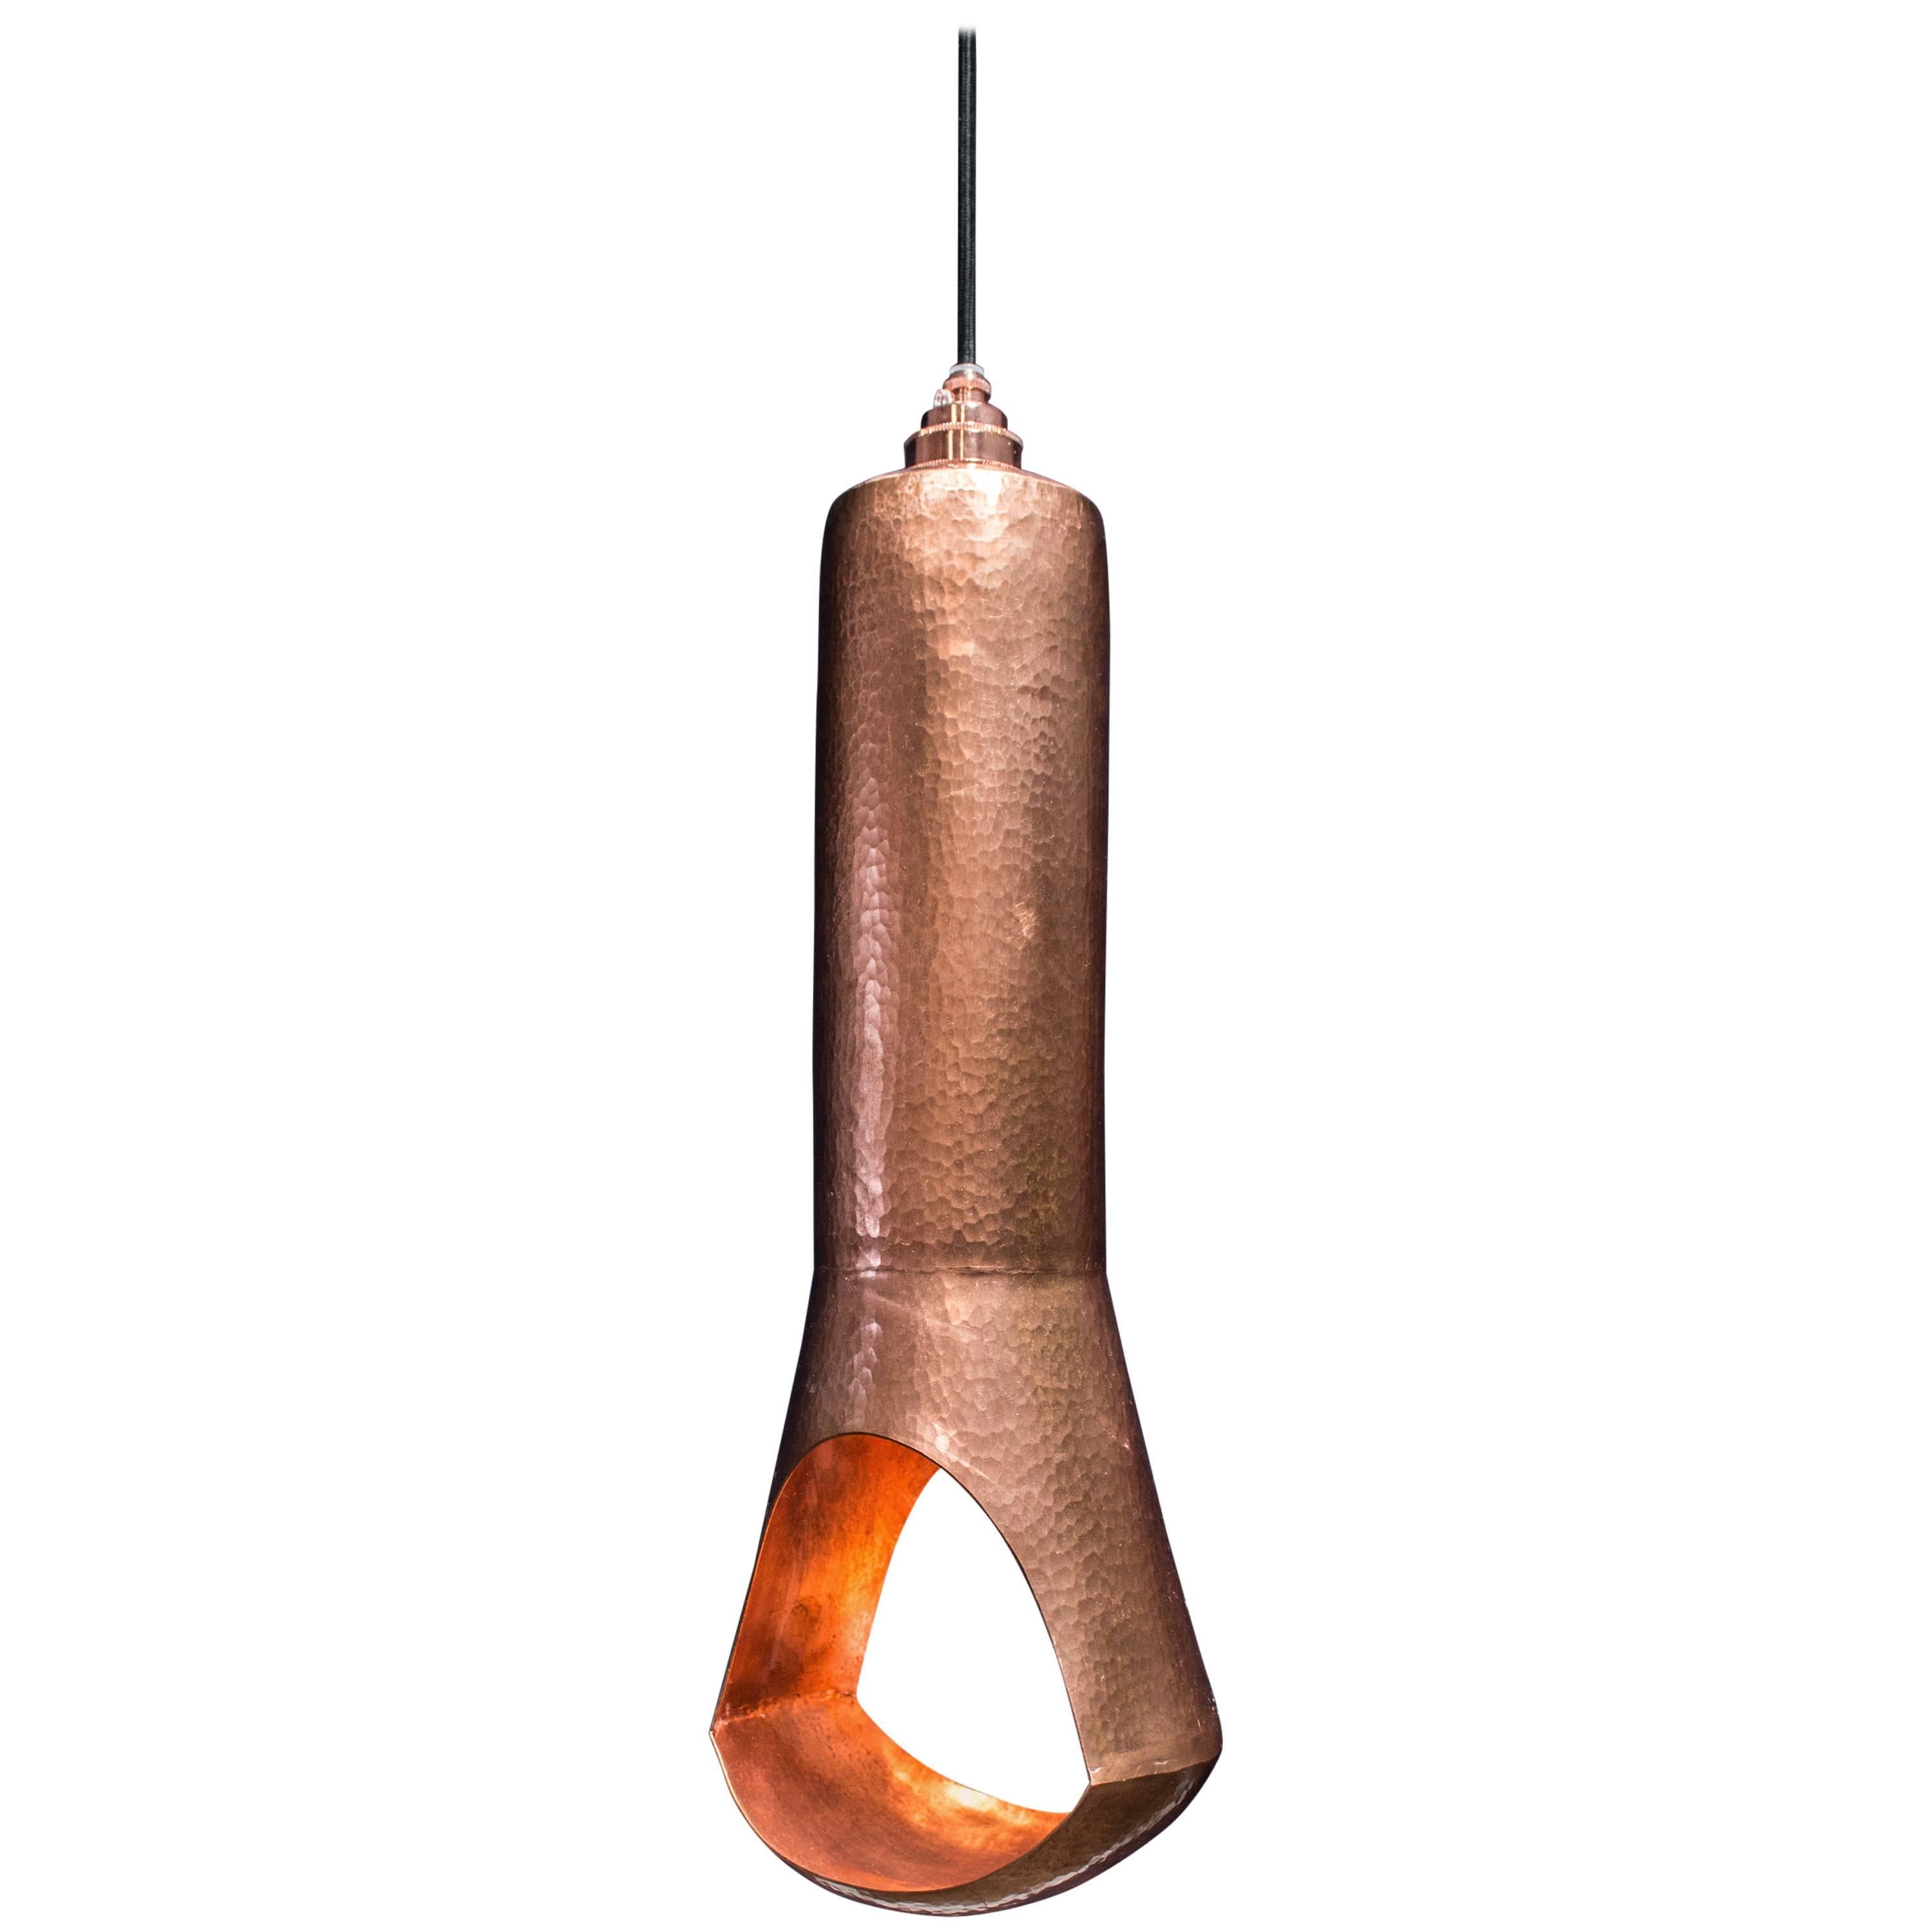 Lens, Hand Hammered Copper Lighting, Mexico For Sale